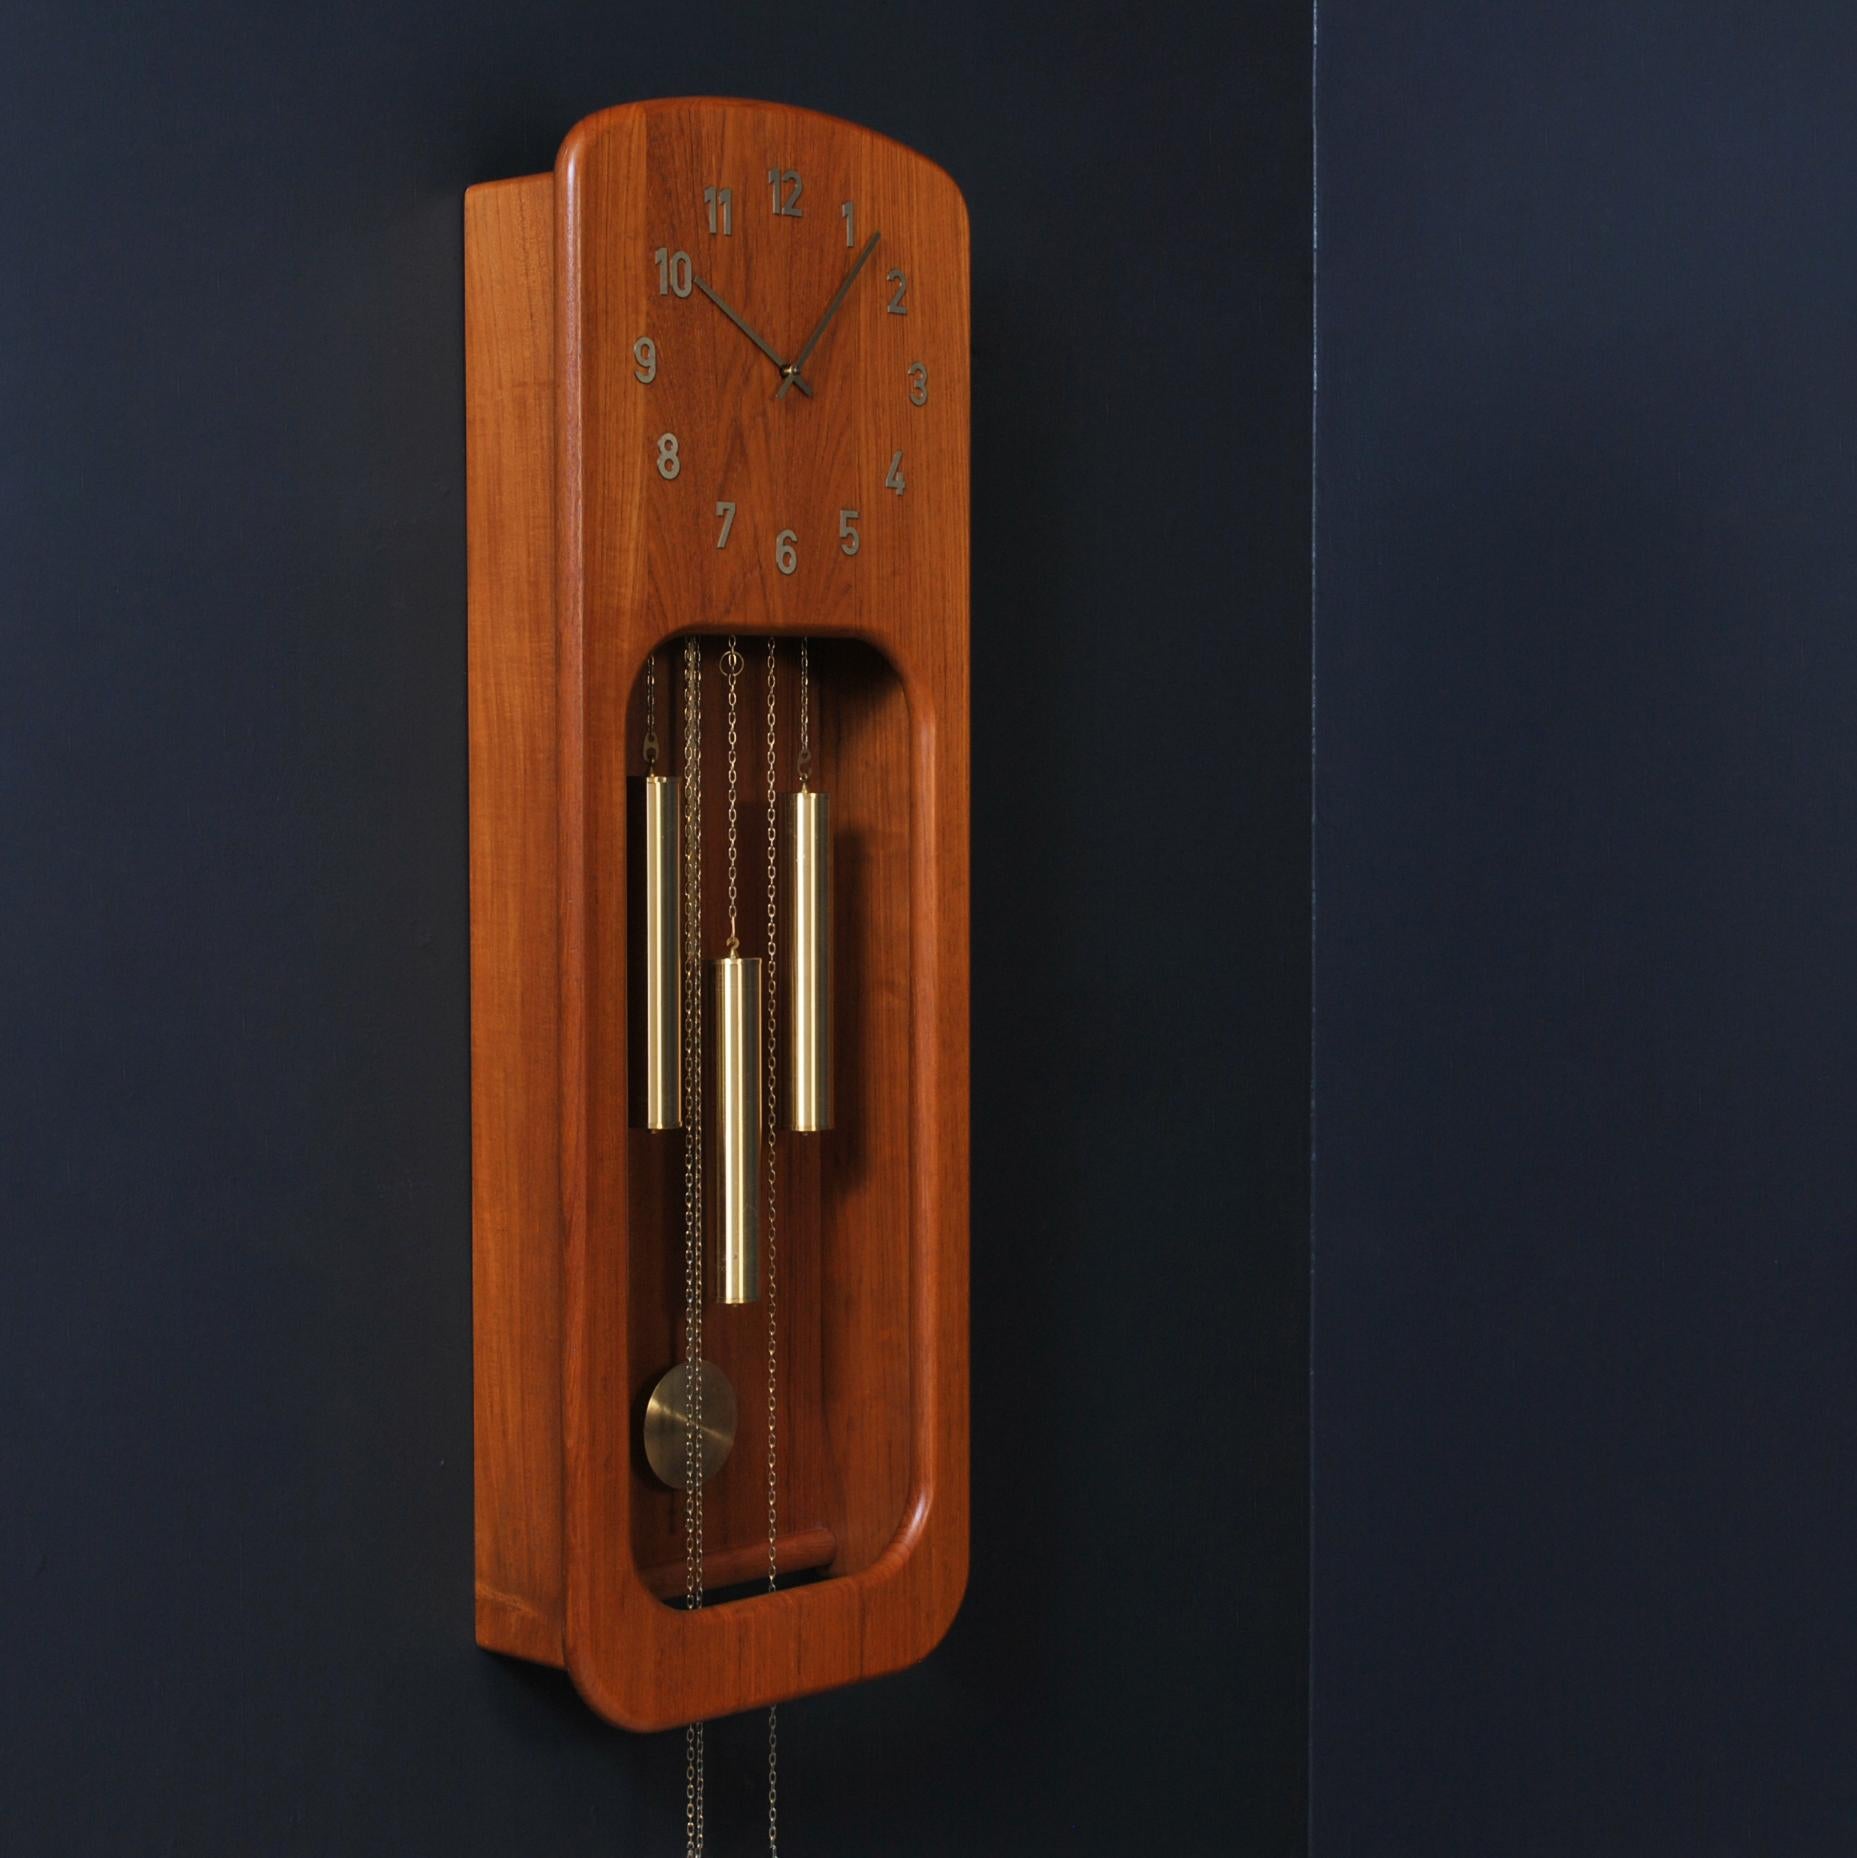 A large Danish long case chiming wall clock. Produced in Denmark circa 1960. A solid and bold design in teak with brass elements. A statement decorative Scandinavian modernist piece. Fully working and keeps perfect time. Time adjustable. The chimes